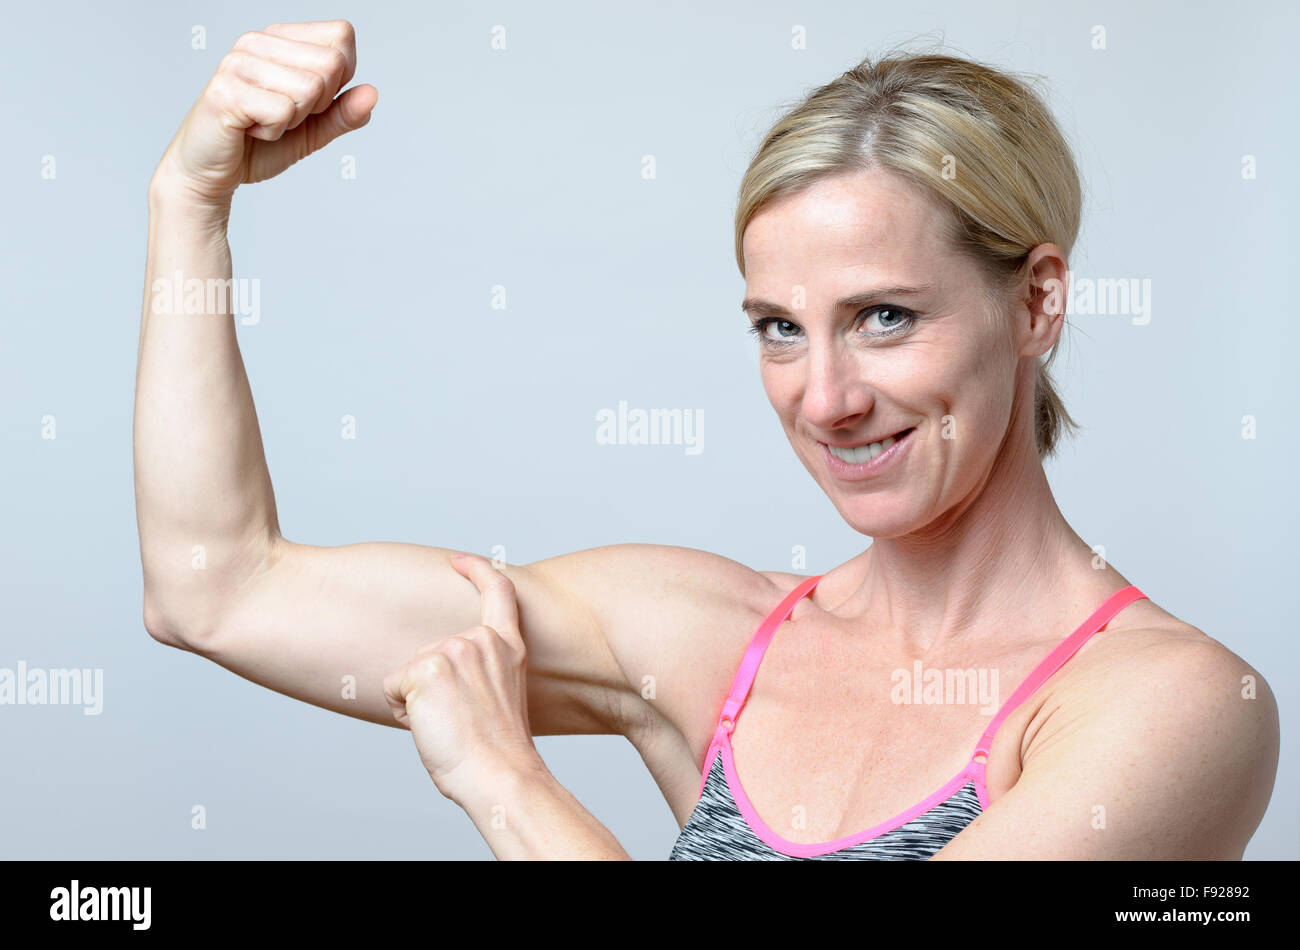 Woman shows biceps Stock Photo by ©everyonensk 152634154